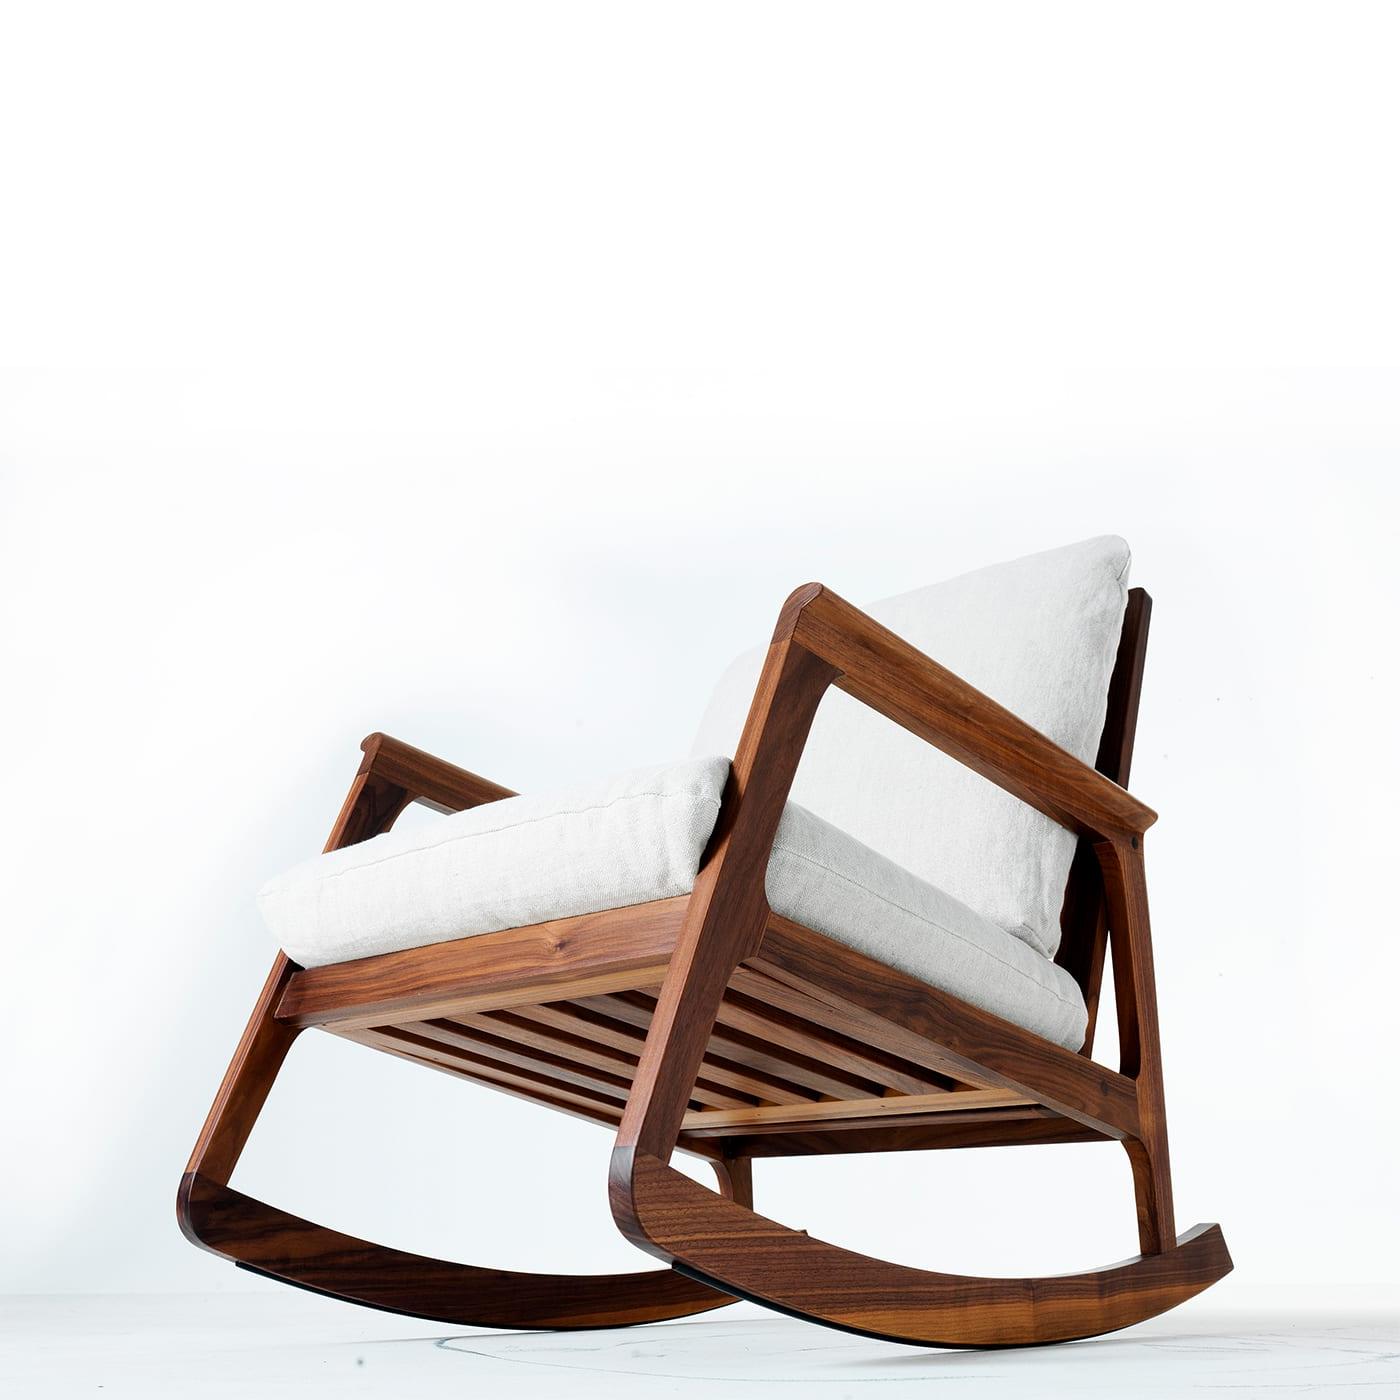 Momento Brown Rocking Chair ☞ Upholstery: Linen BEL-LINO G077 11